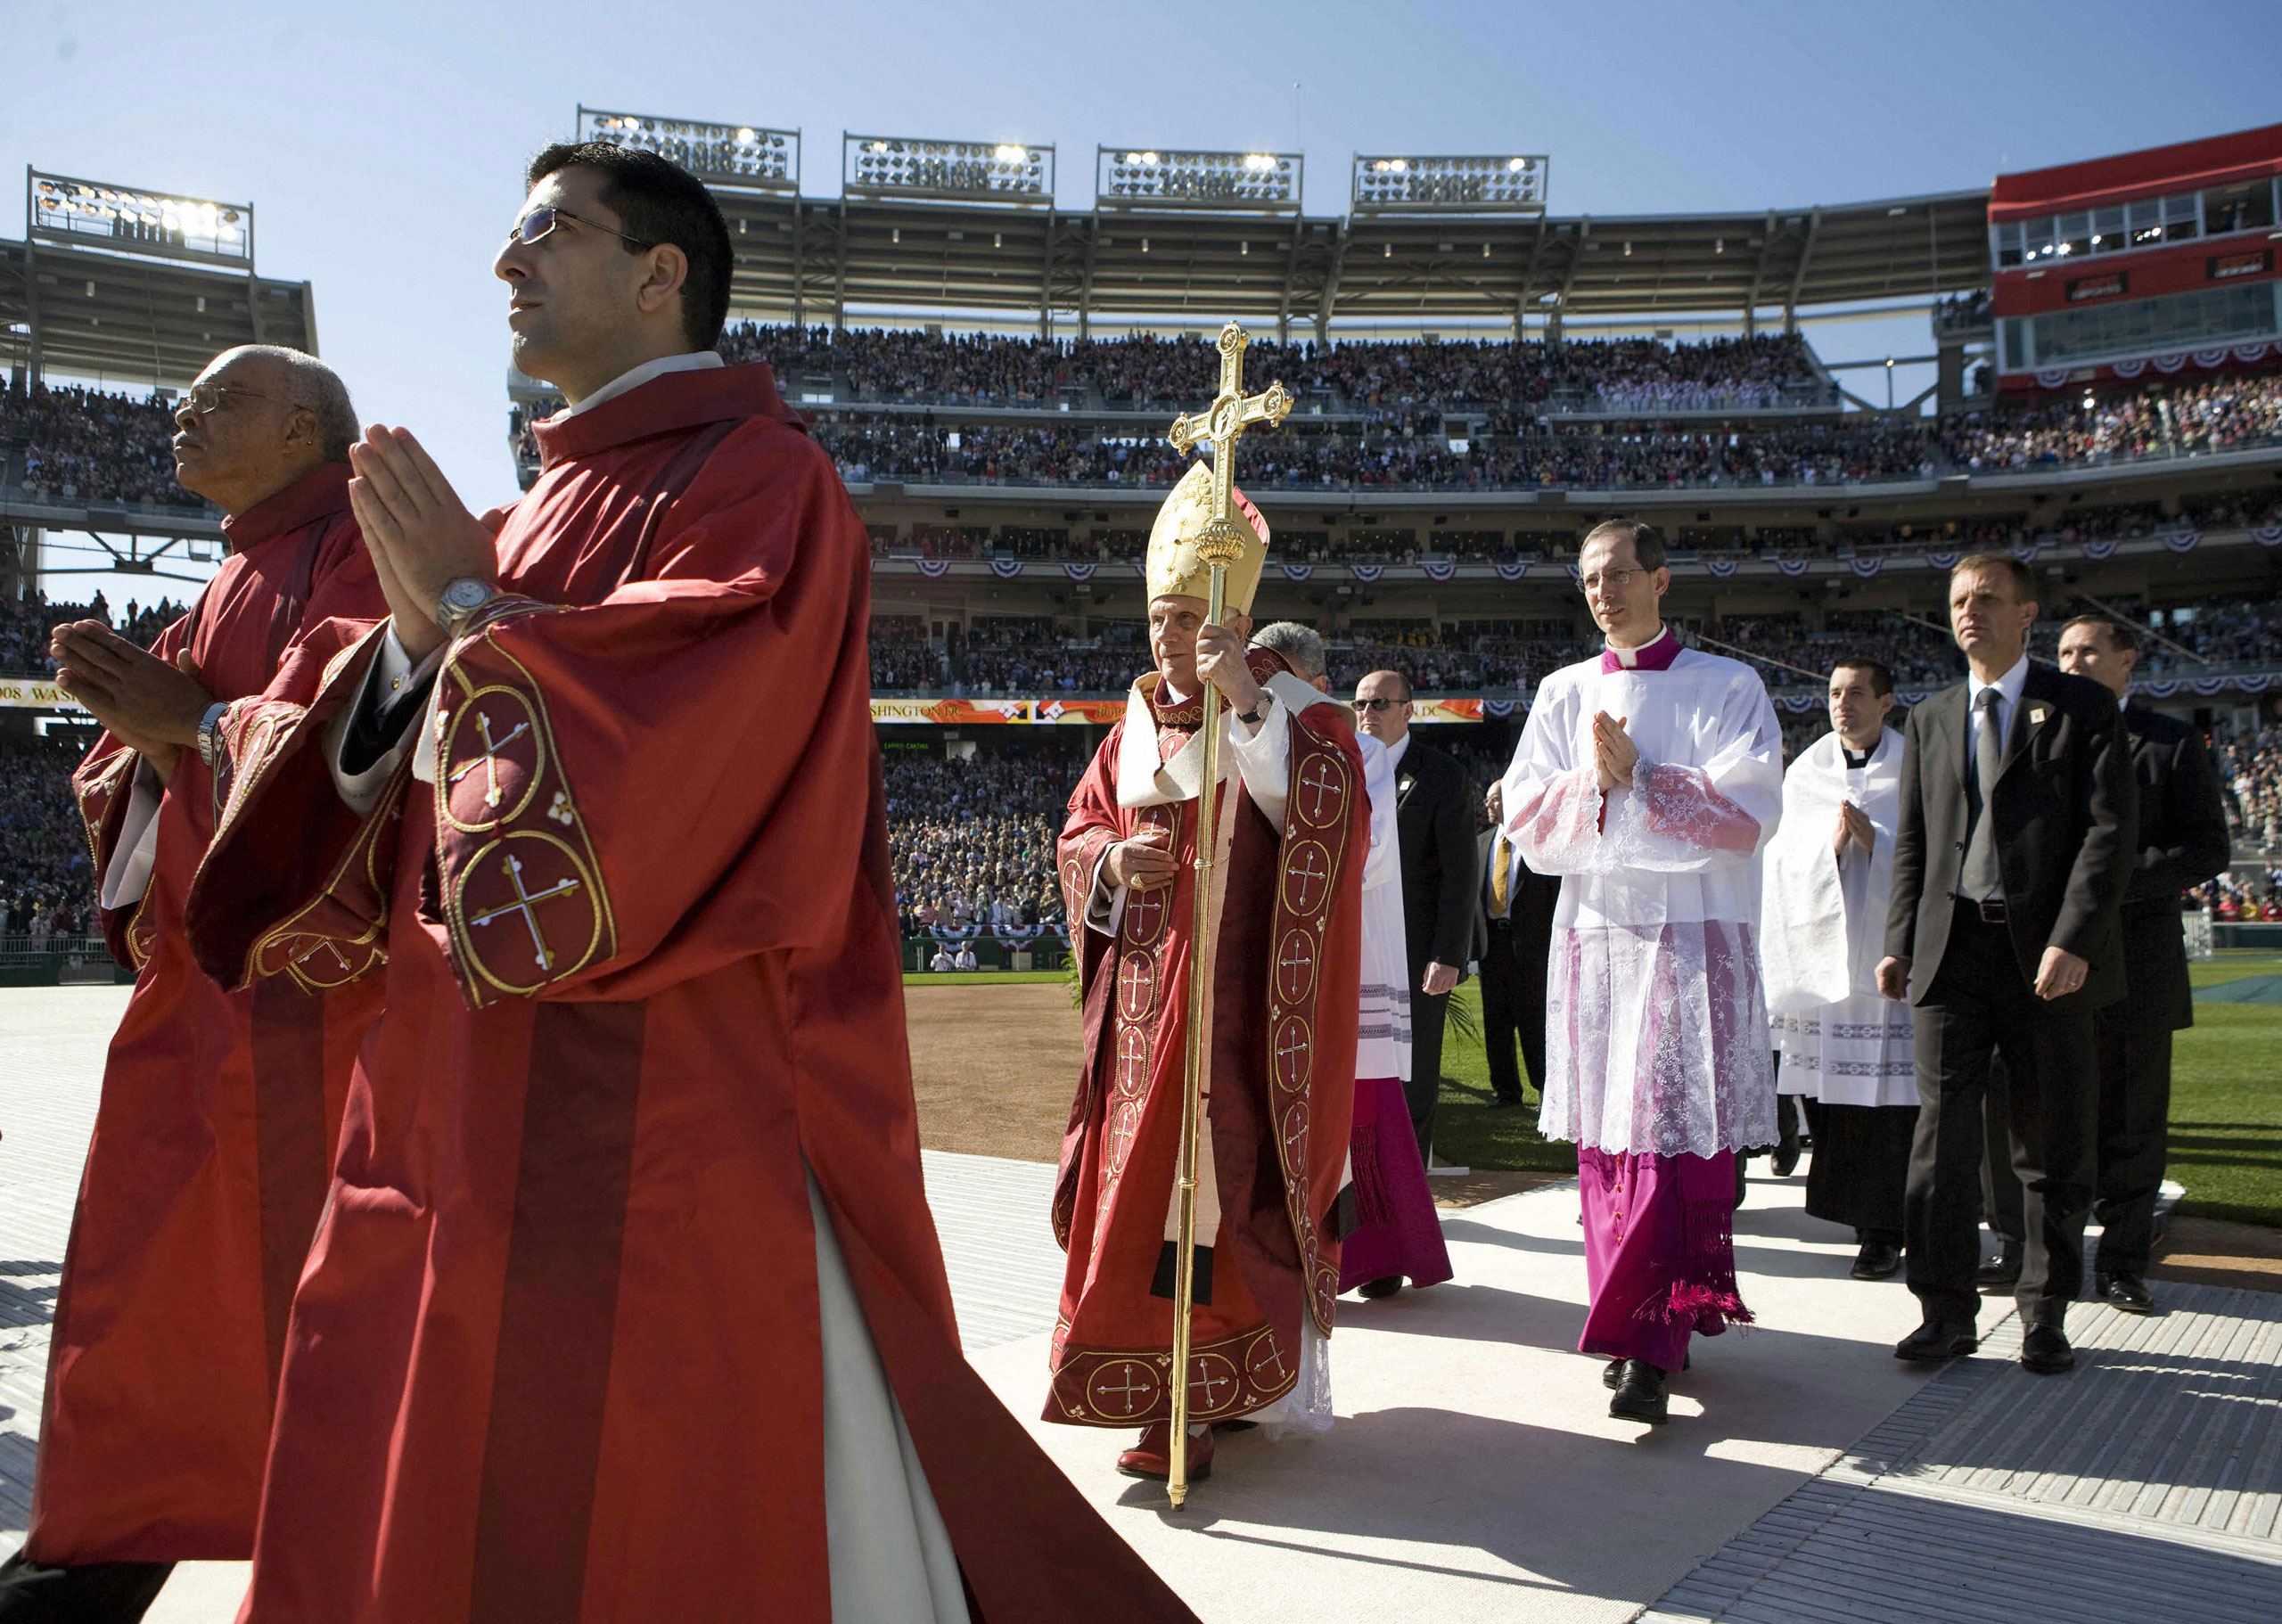 Pope Benedict XVI arrives to celebrate Mass, April 17, 2008 at Nationals Park in Washington, DC.